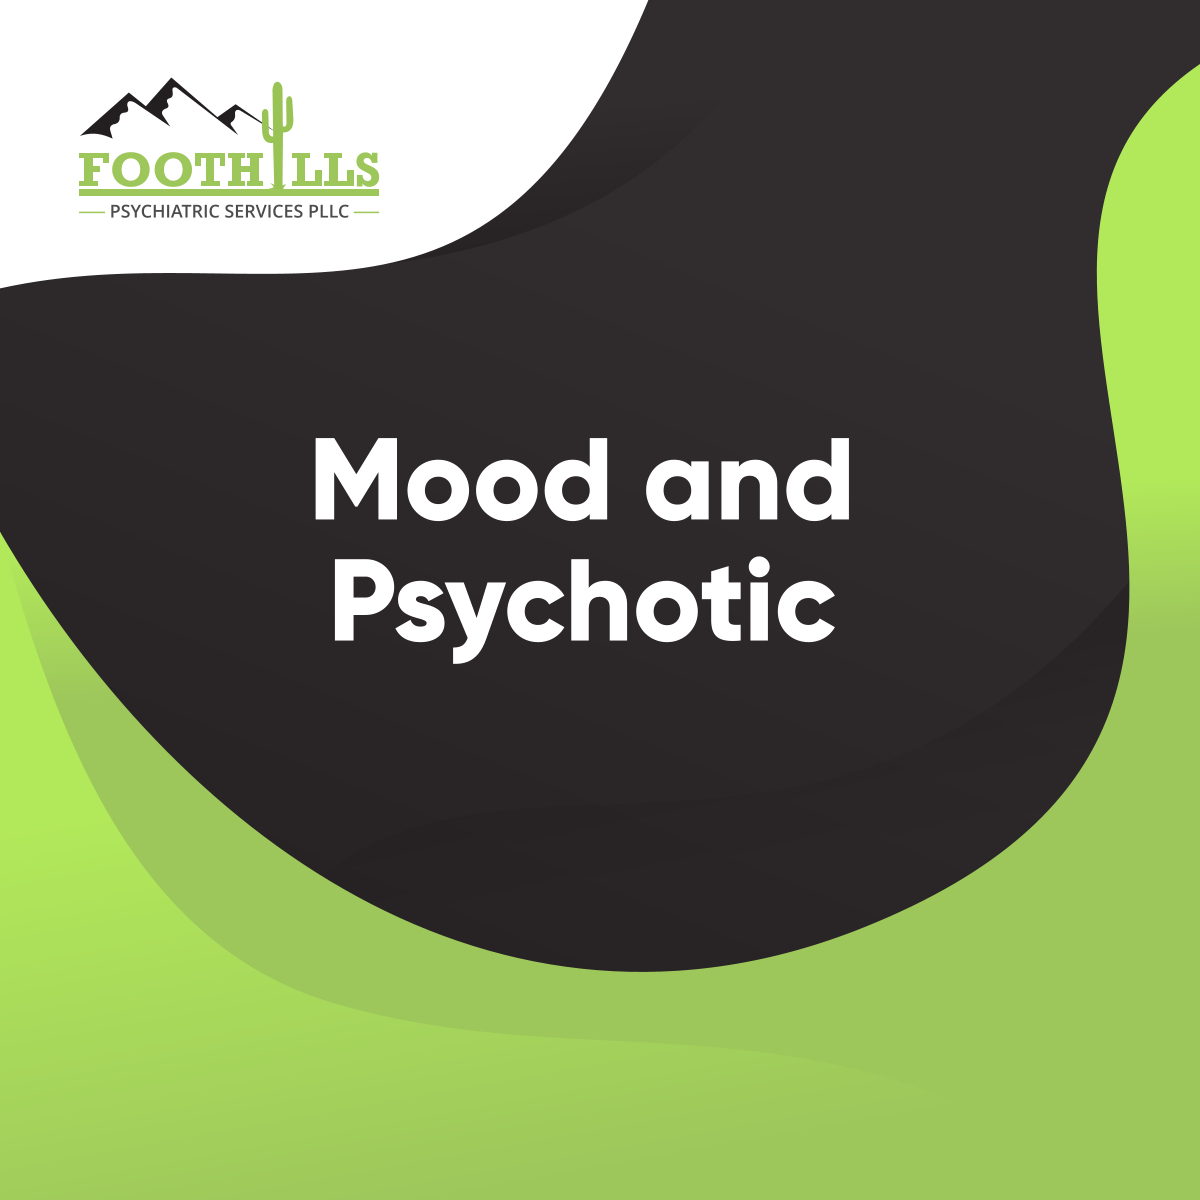 Here's one thing about schizoaffective disorder: it's a disorder that has mood and psychotic symptoms. The name provides a clue for this: schizo for the psychotic symptoms and affective for the mood symptoms.

#SchizoaffectiveDisorder #MentalHealthCare #MesaAZ